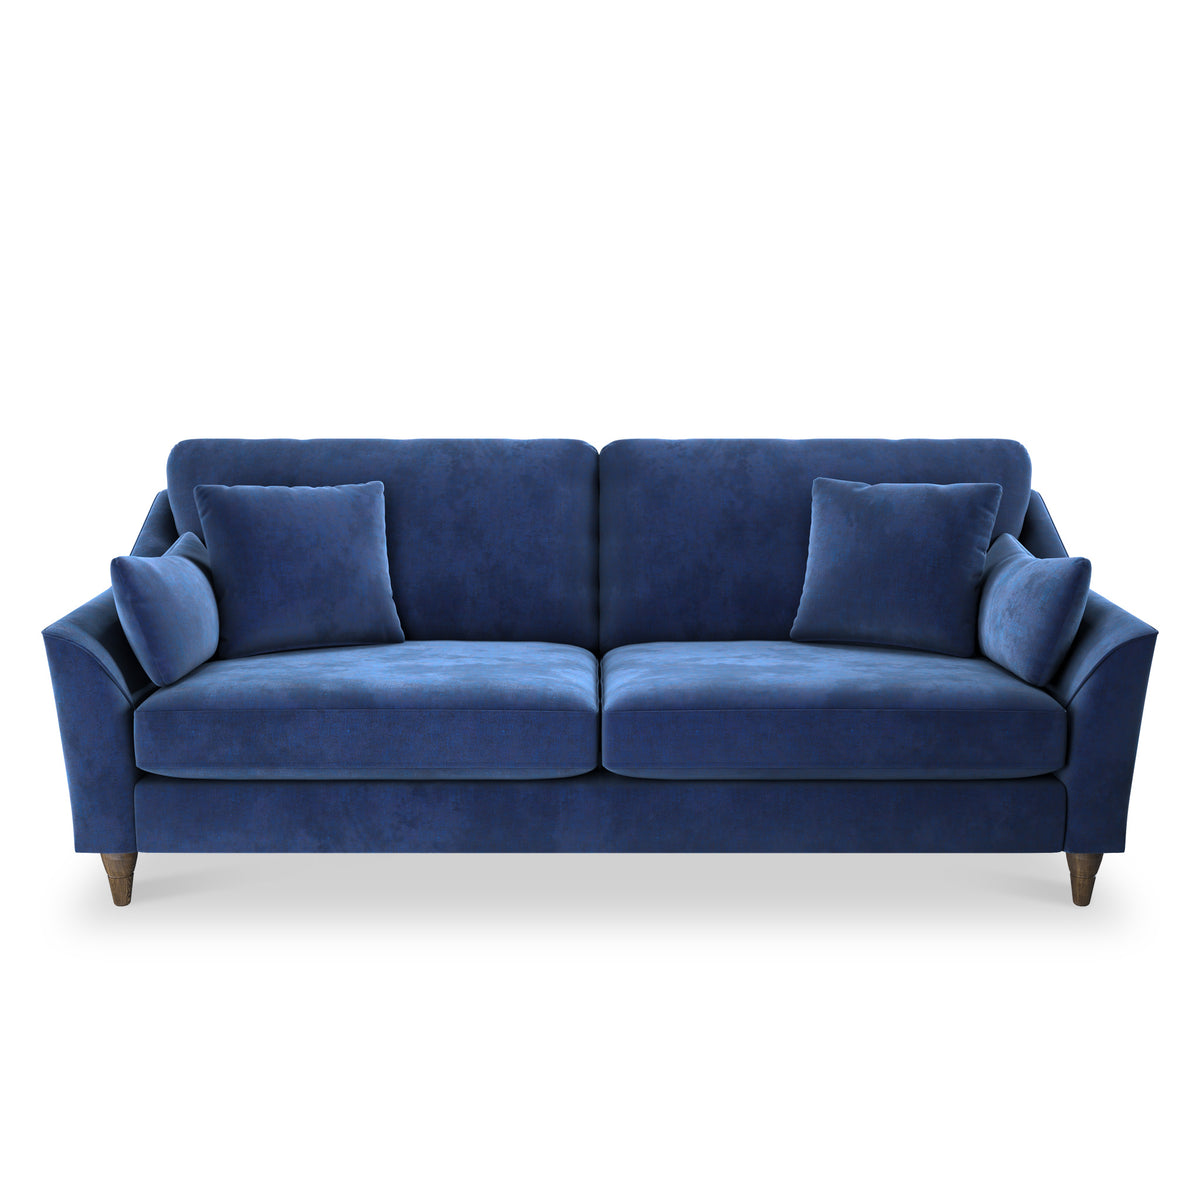 Charice Navy 3 Seater couch